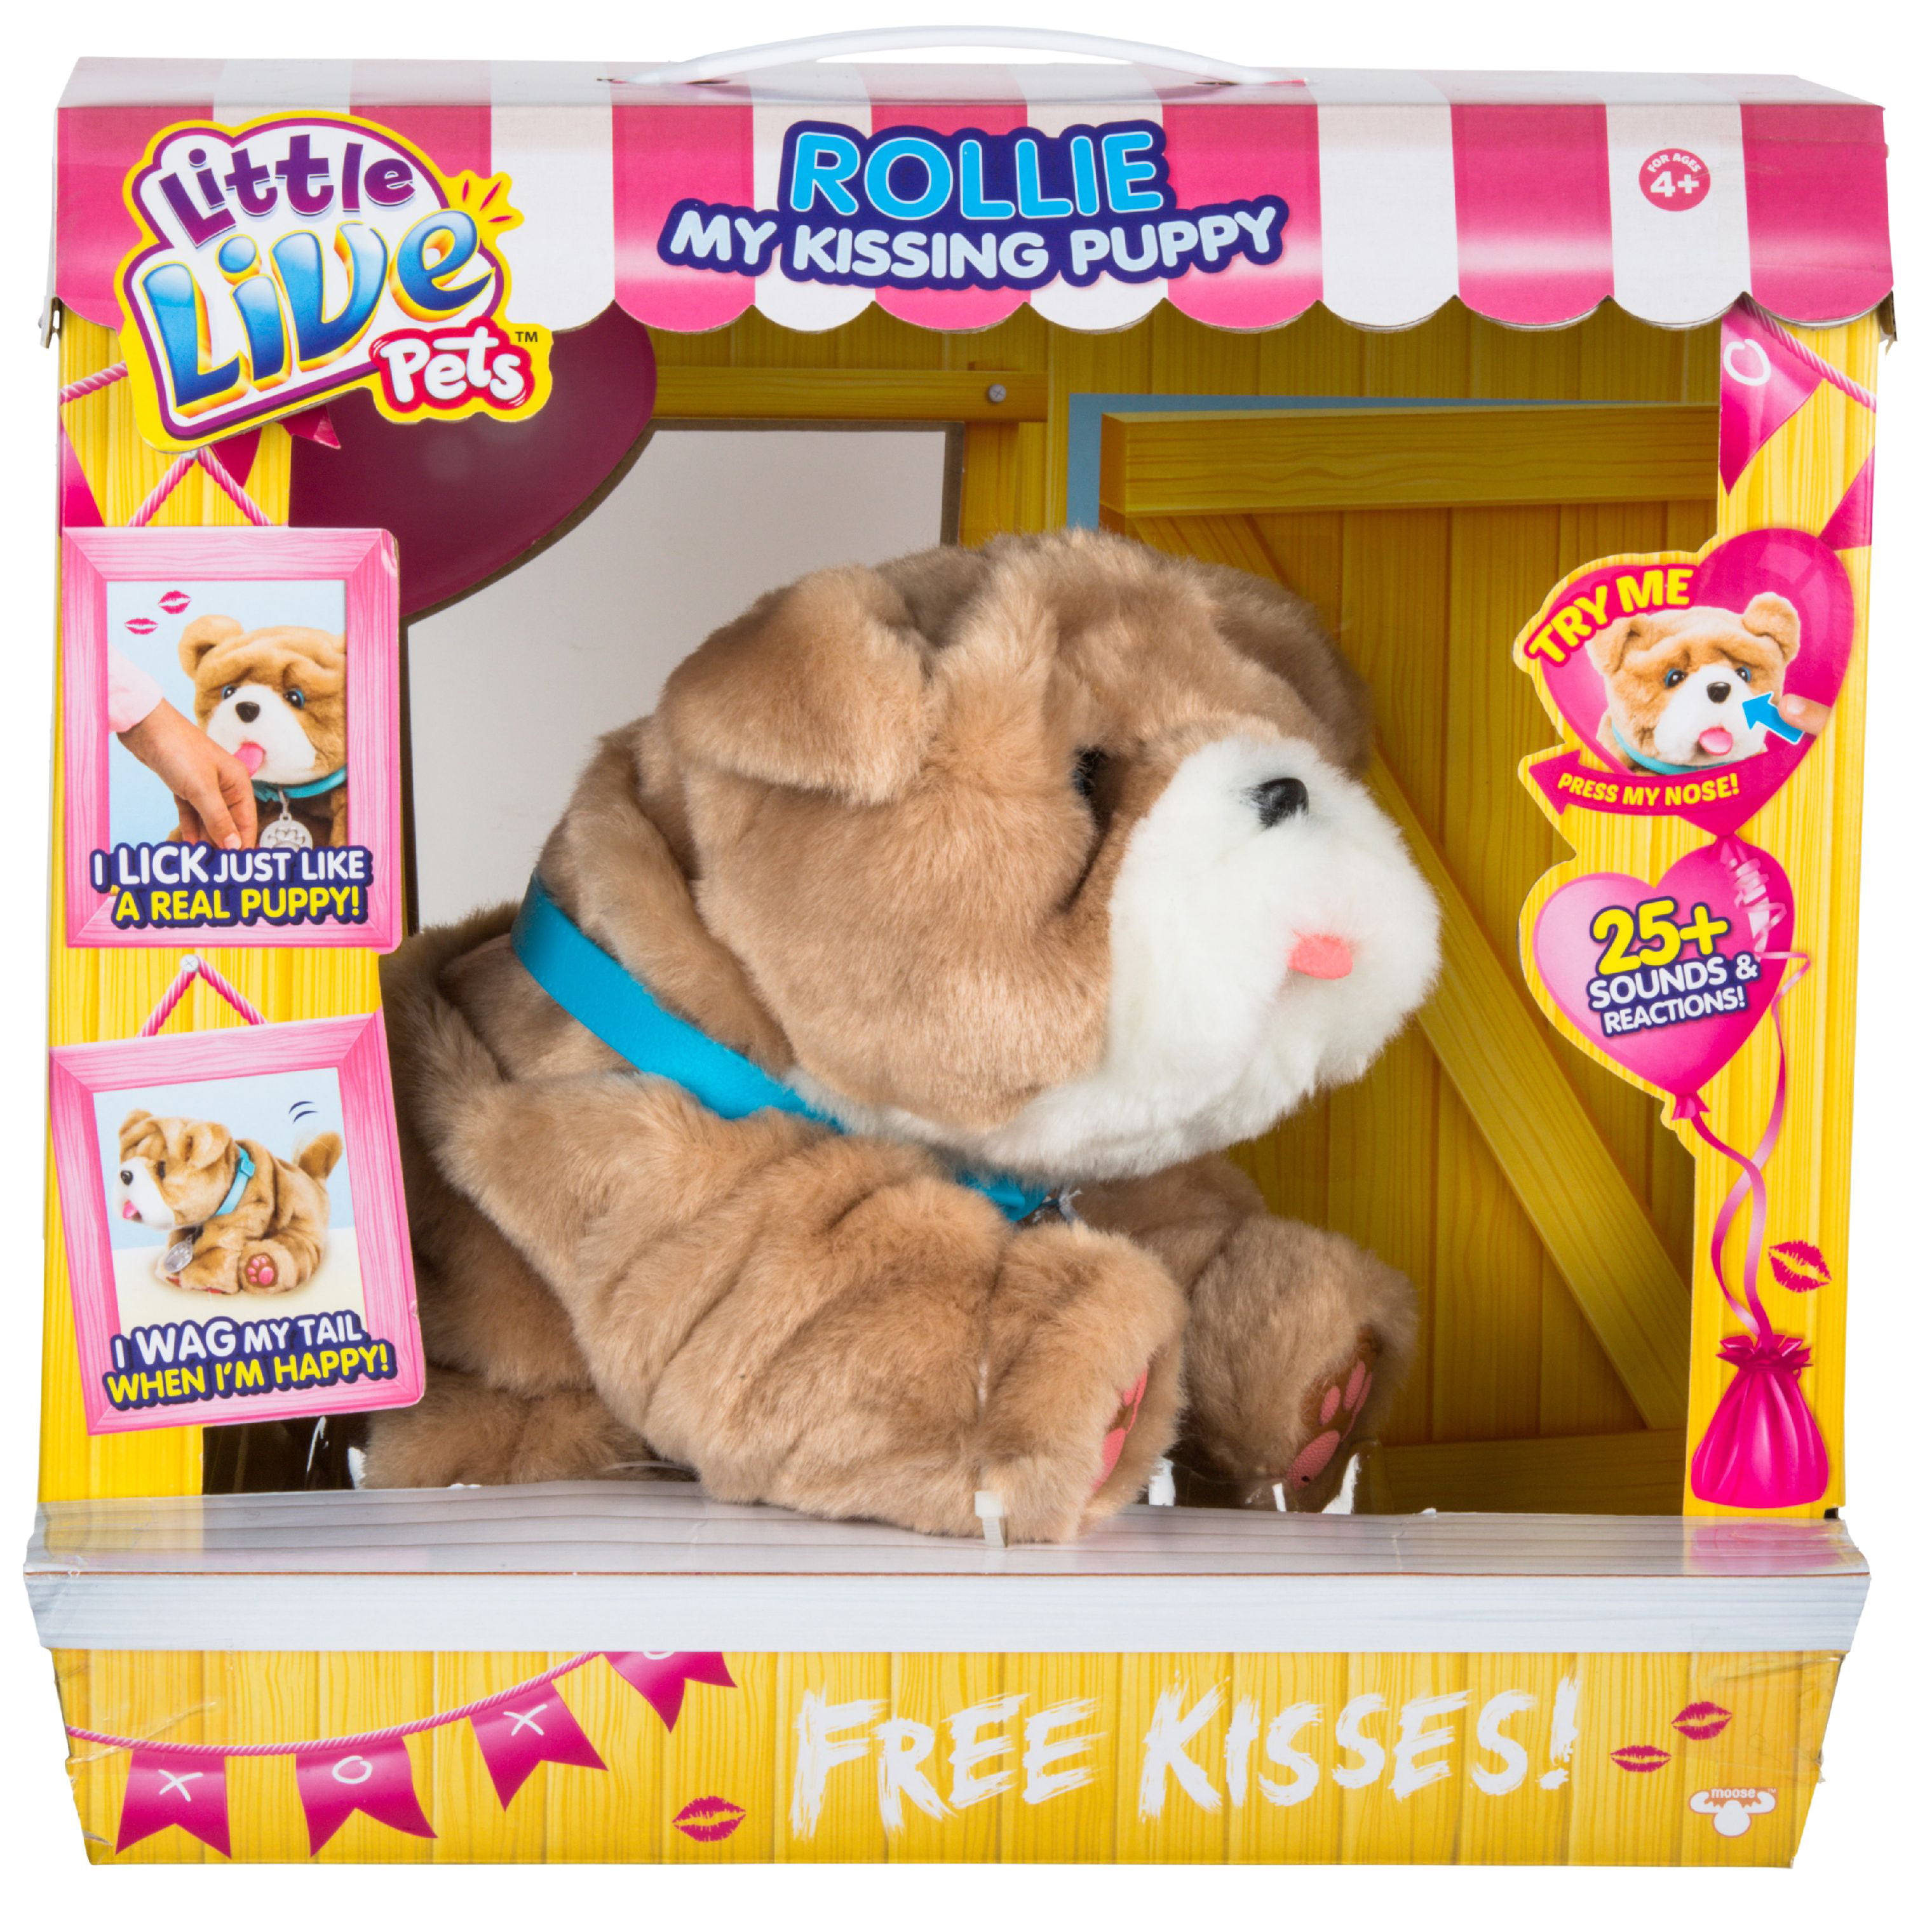 New Little Live Pets My Kissing Puppy Rollie Plush Fuzzy Brown Dog 25 Sounds 